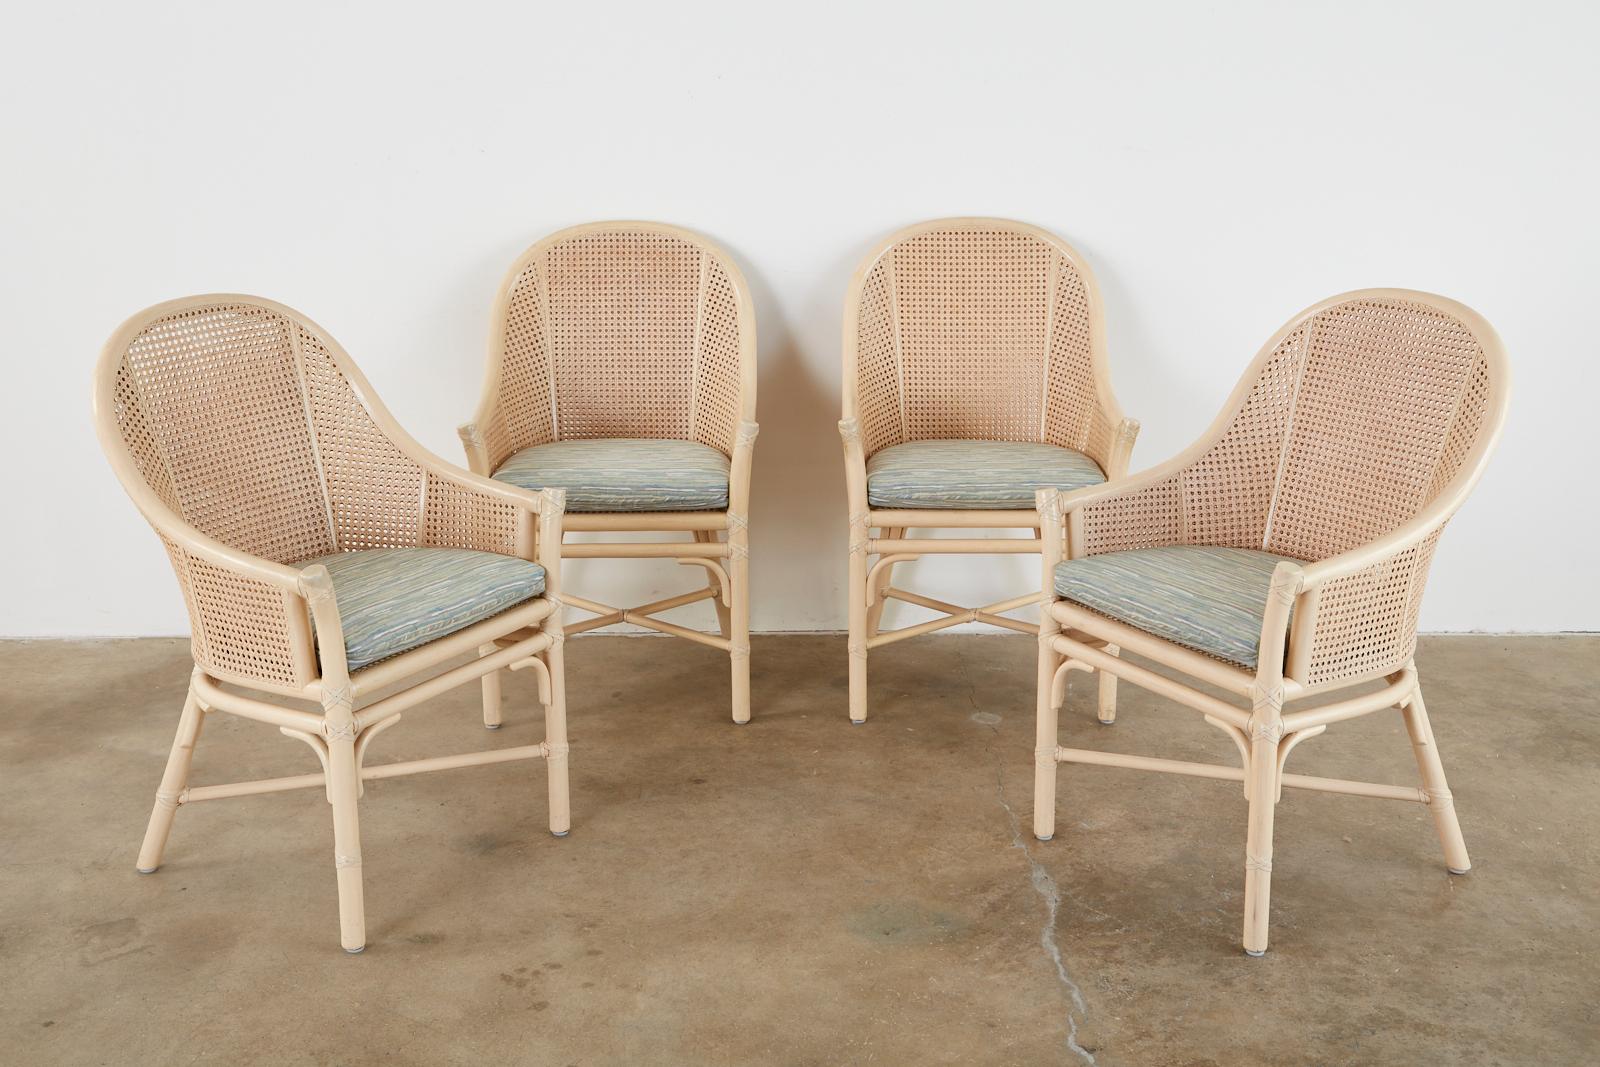 Iconic set of four genuine McGuire dining armchairs featuring double caned sides in a classic barrel form. Currently known as the Belden chair the vintage versions of these chairs were made to a higher quality standard. The newer chairs do not have